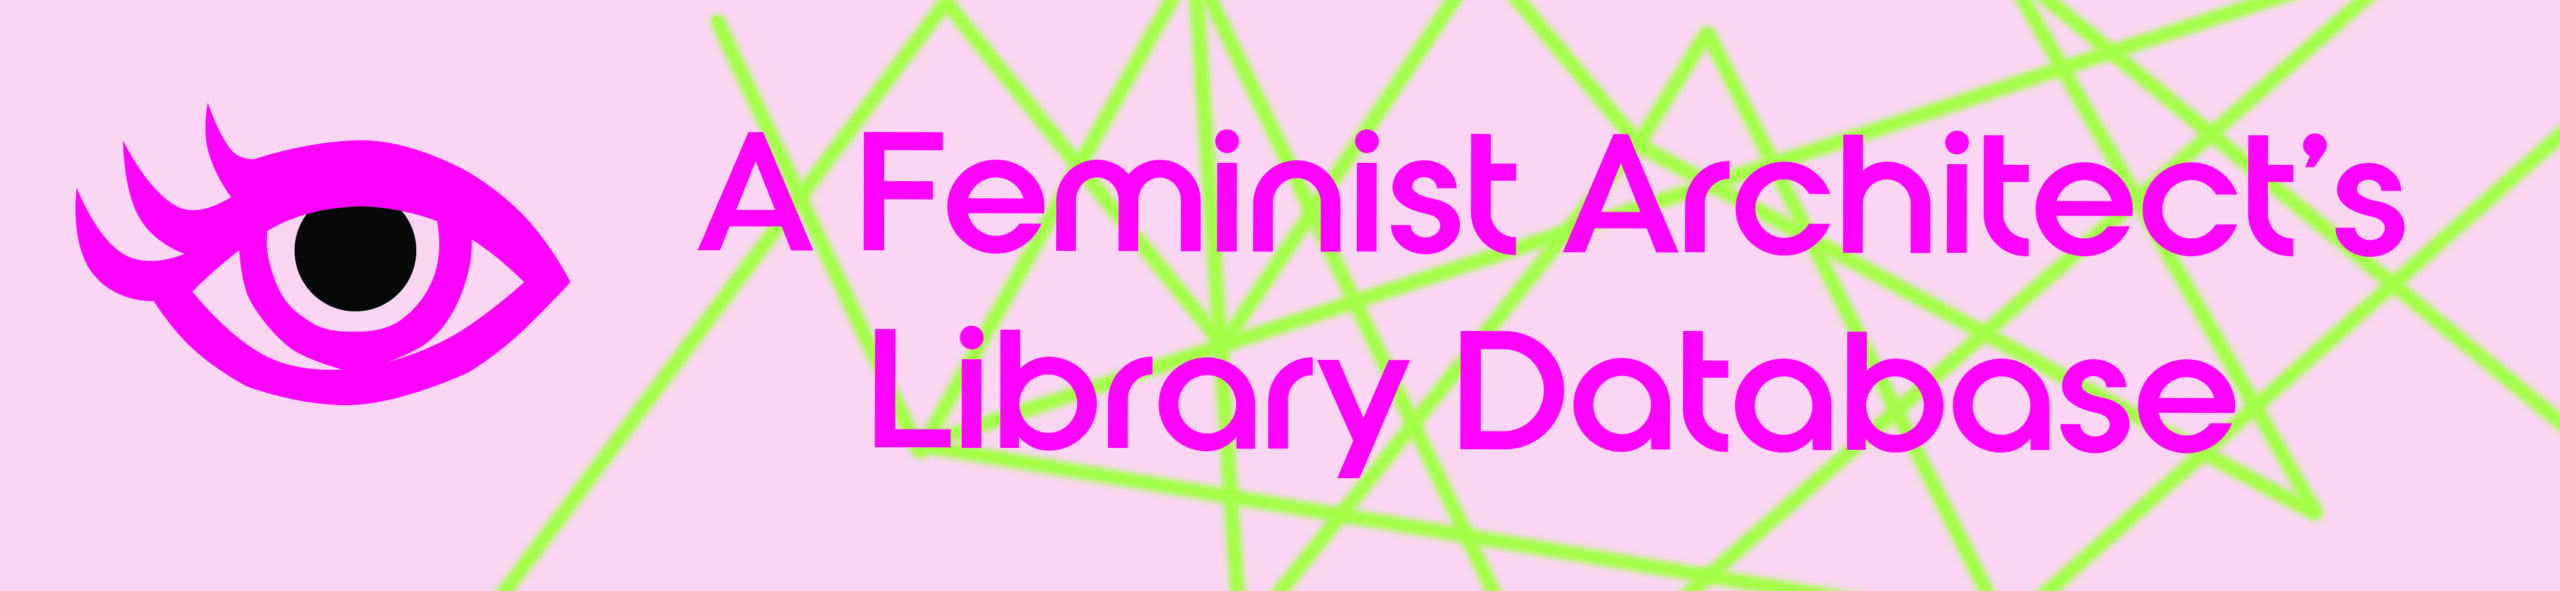 Pink and green banner with the text "A Feminist Architect's Library Database," with a Pink eye graphic on the left side.